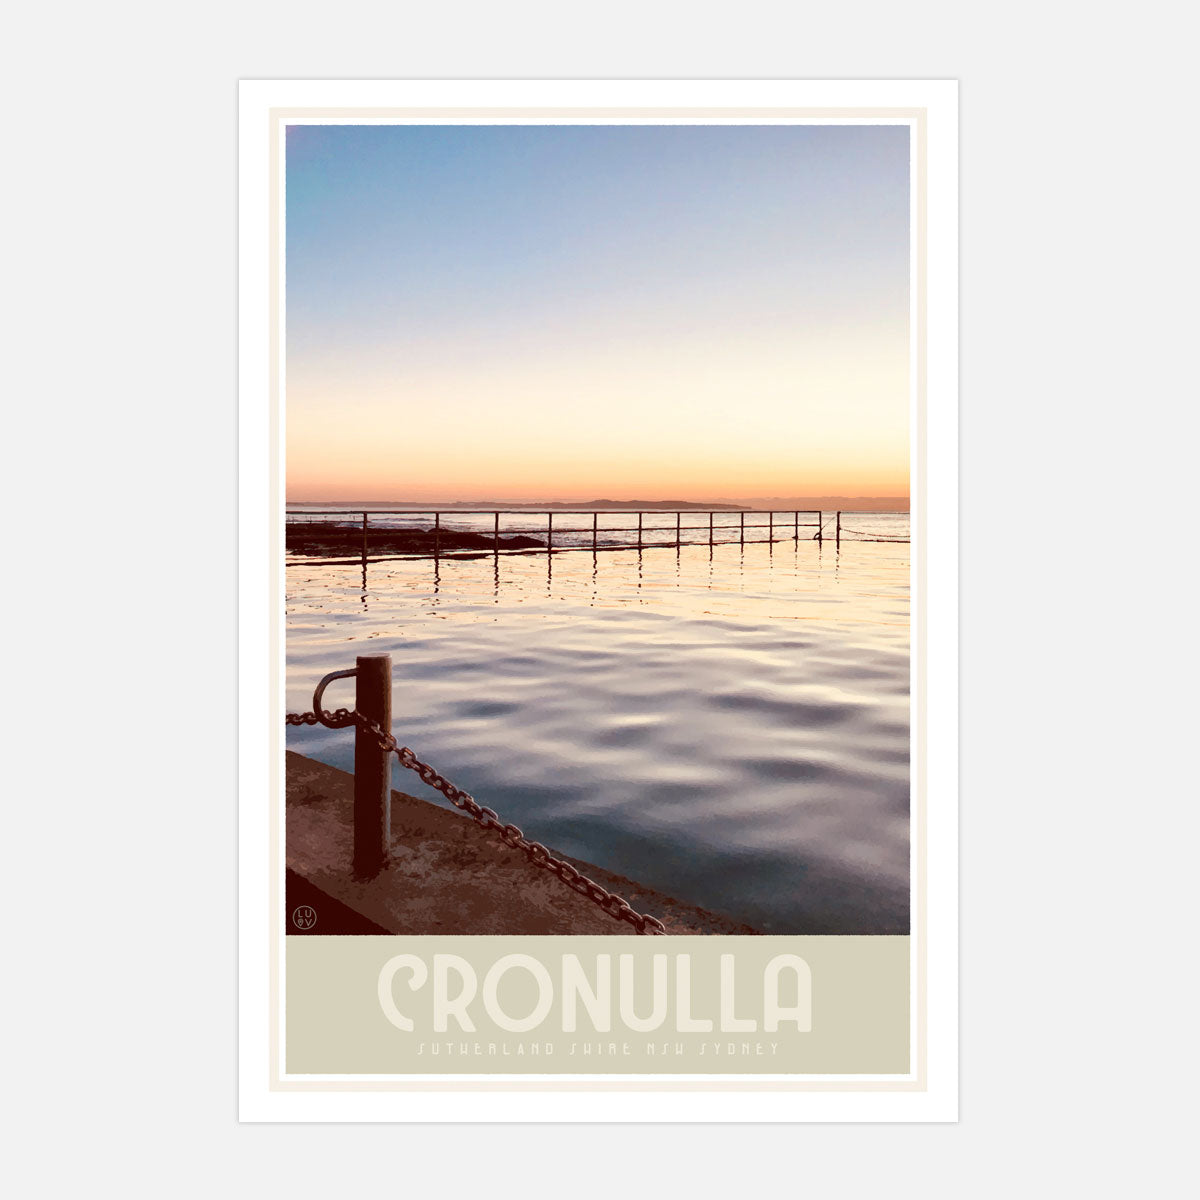 Cronulla pool vintage travel style poster by places we luv